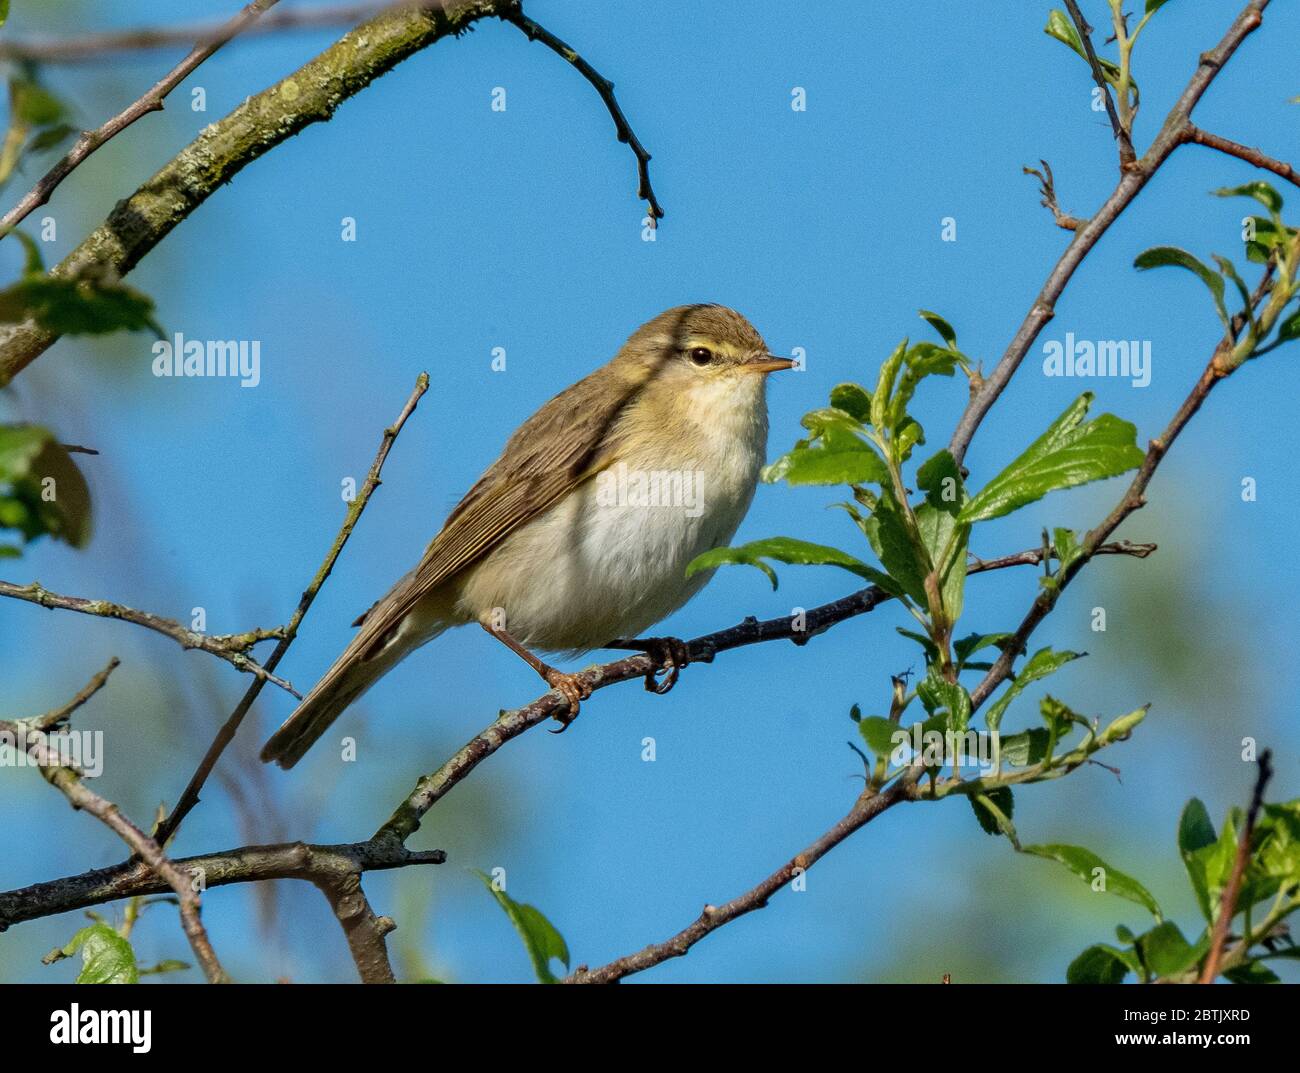 A Willow Warbler (Phylloscopus trochilus) perched on a twig in a tree Livingston, West Lothian, Scotland. Stock Photo